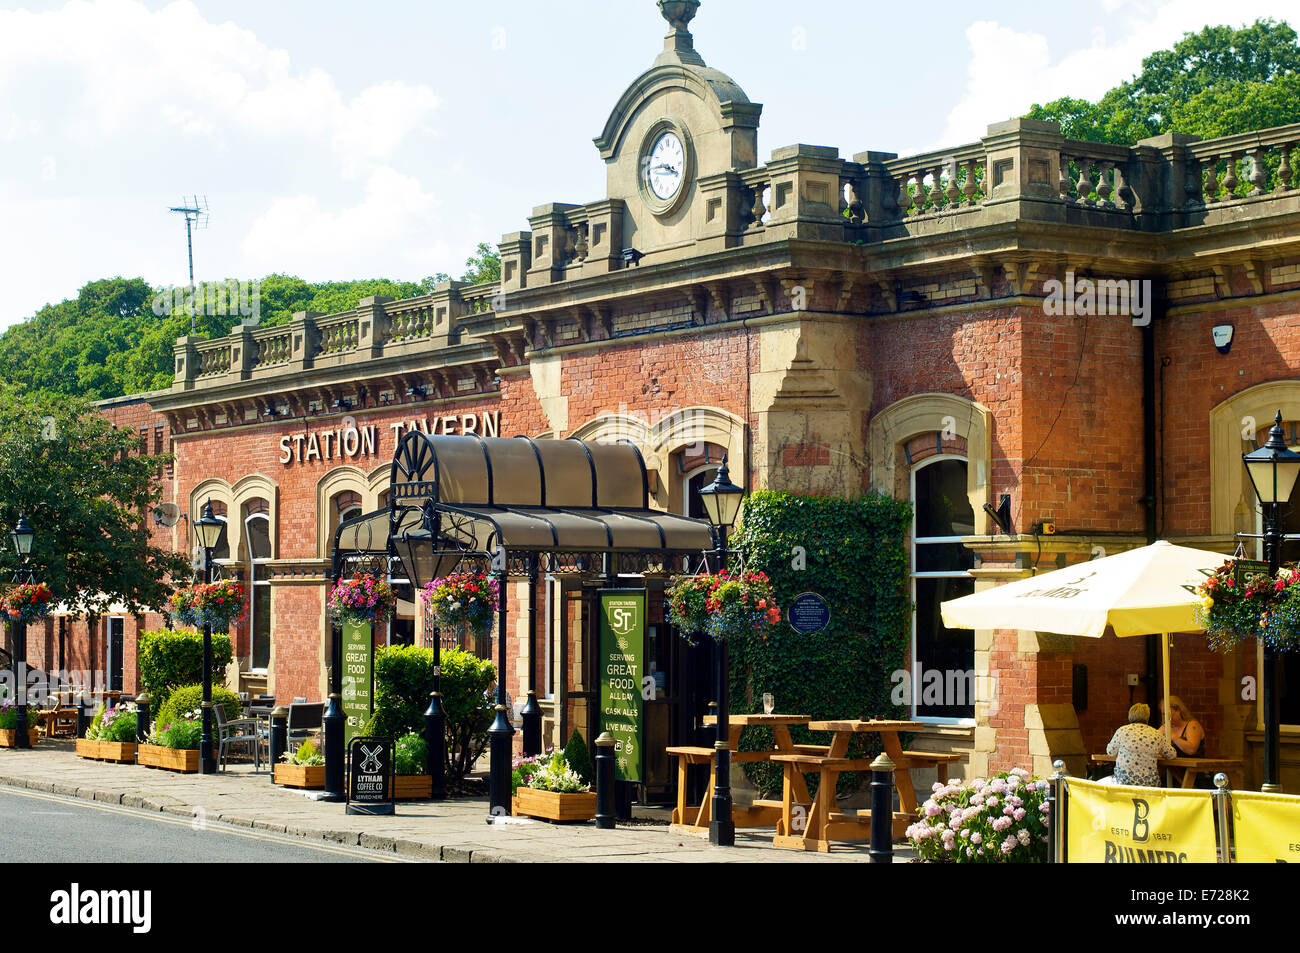 Station Tavern and railway station in Lytham St Annes Stock Photo